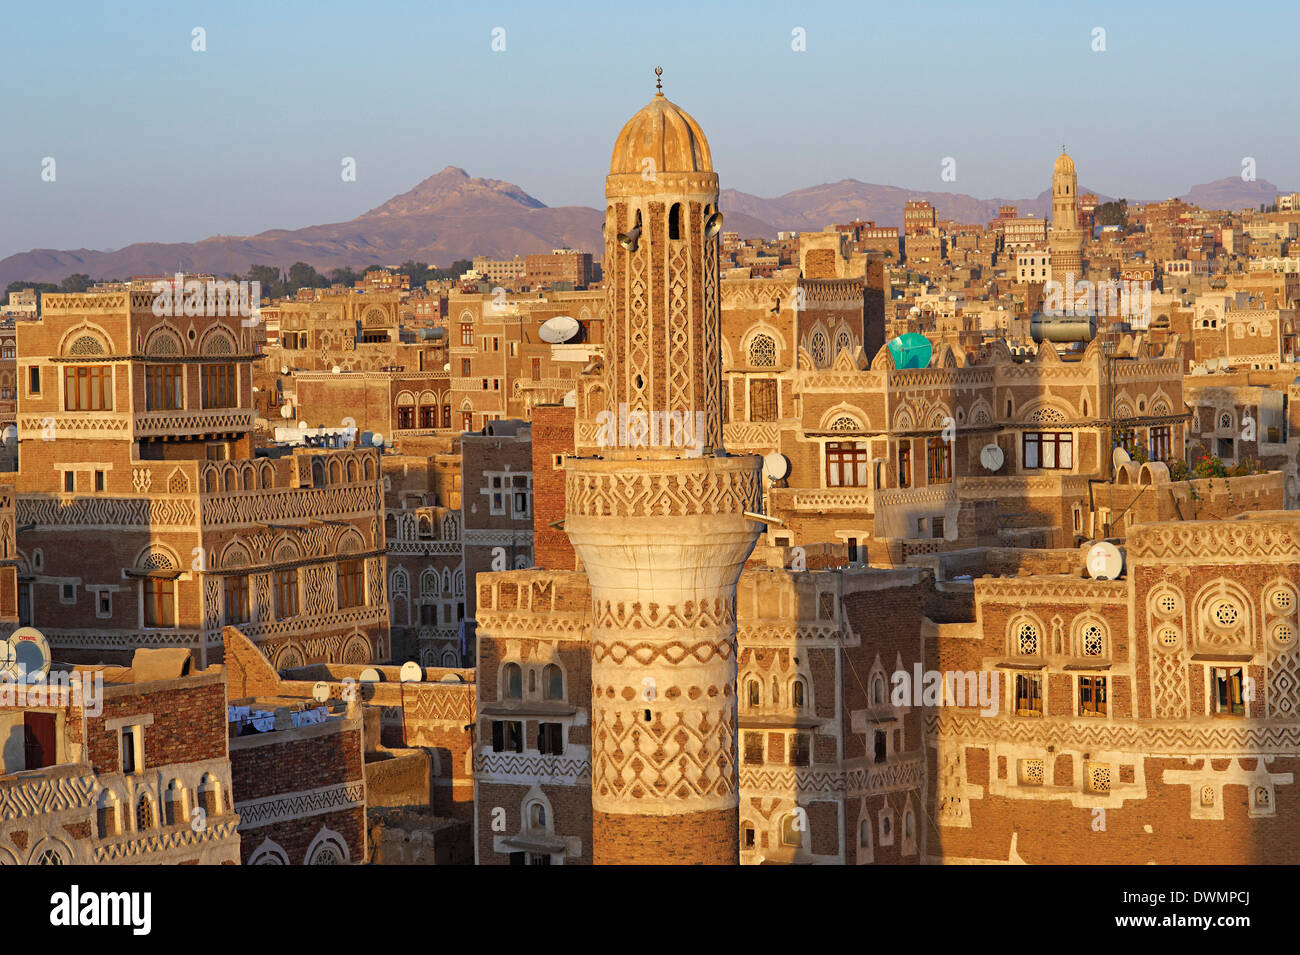 Elevated view of the Old City of Sanaa, UNESCO World Heritage Site, Yemen, Middle East Stock Photo